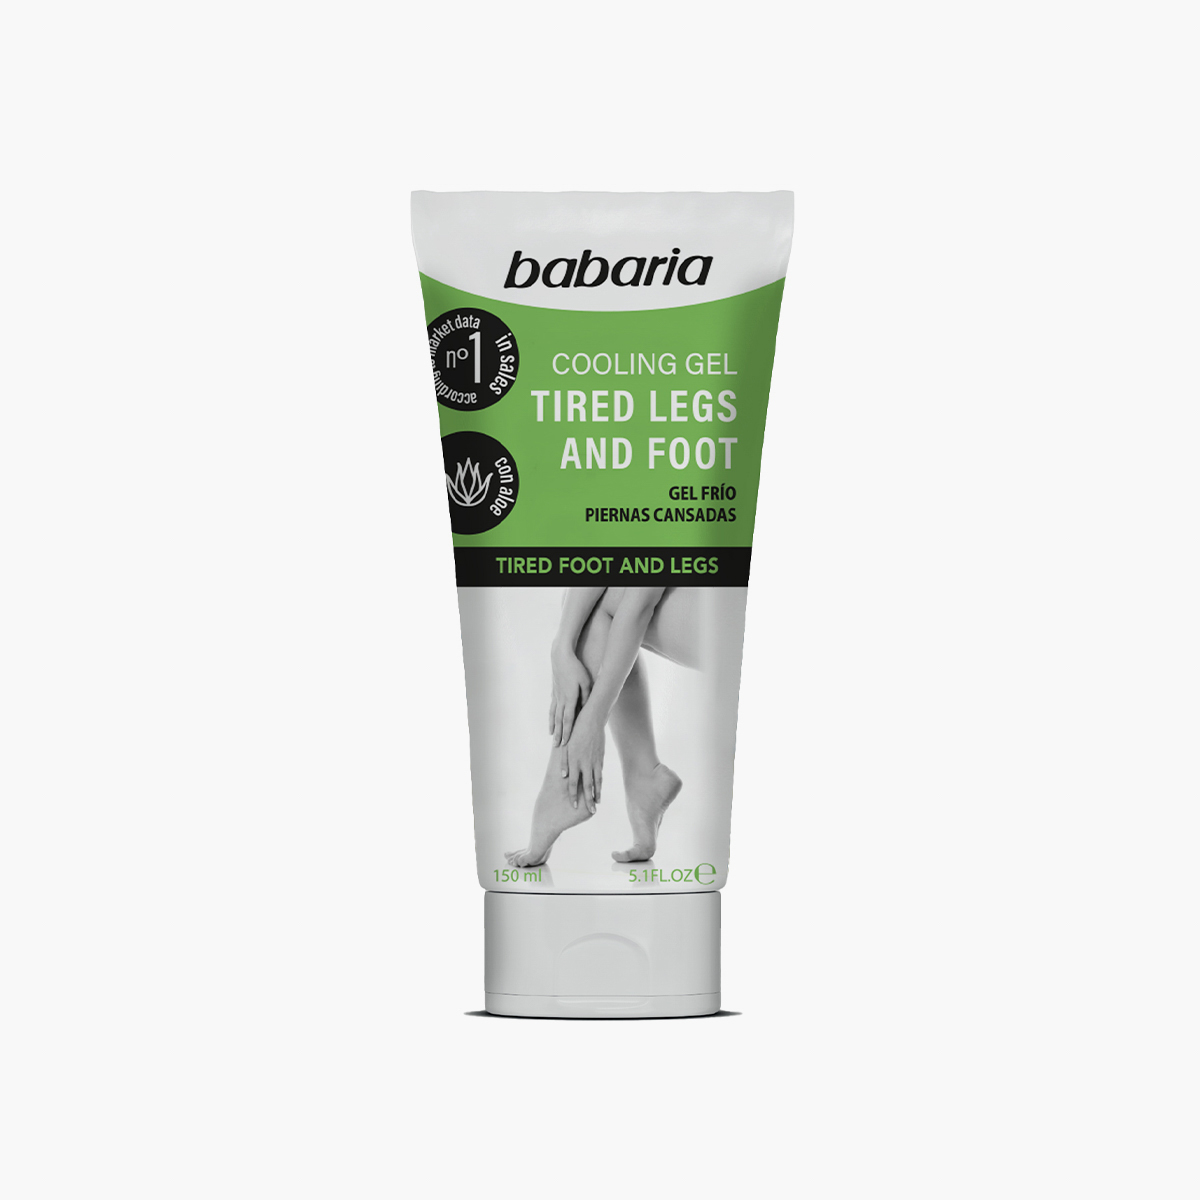 Cooling Gel for Tired Legs and Feet